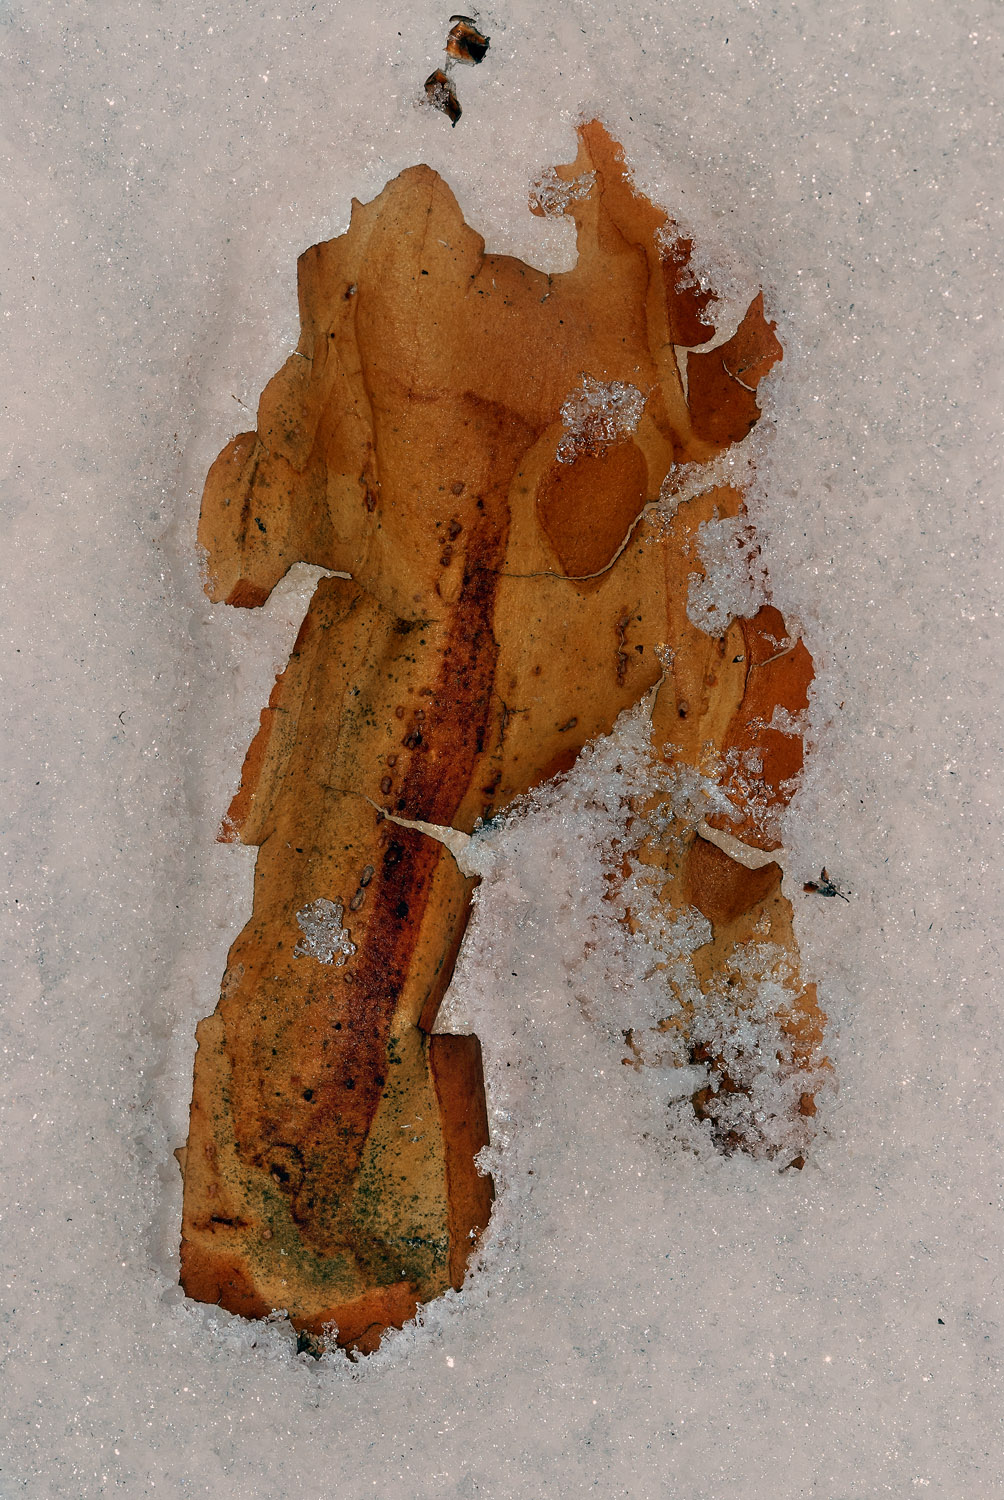 a piece of bark in the snow